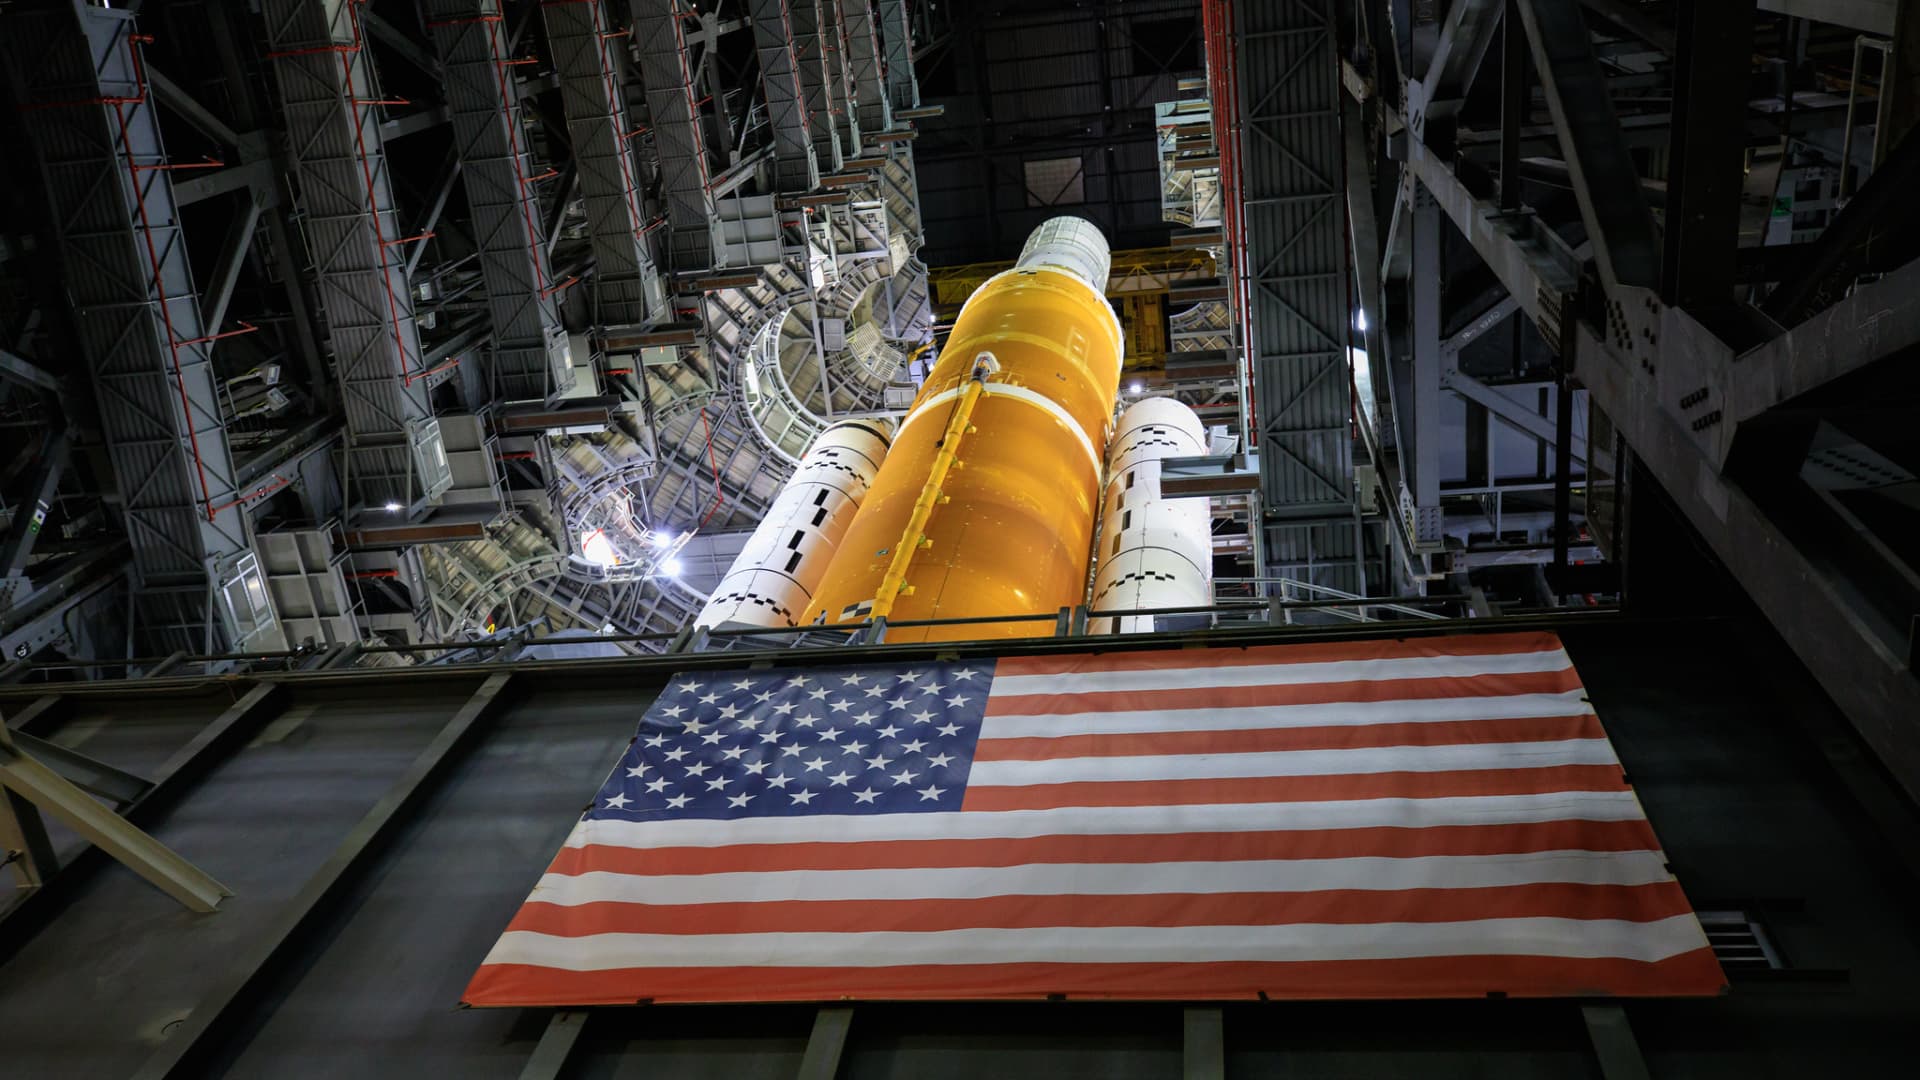 Wilson Aerospace sues Boeing over allegedly stole IP for NASA projects